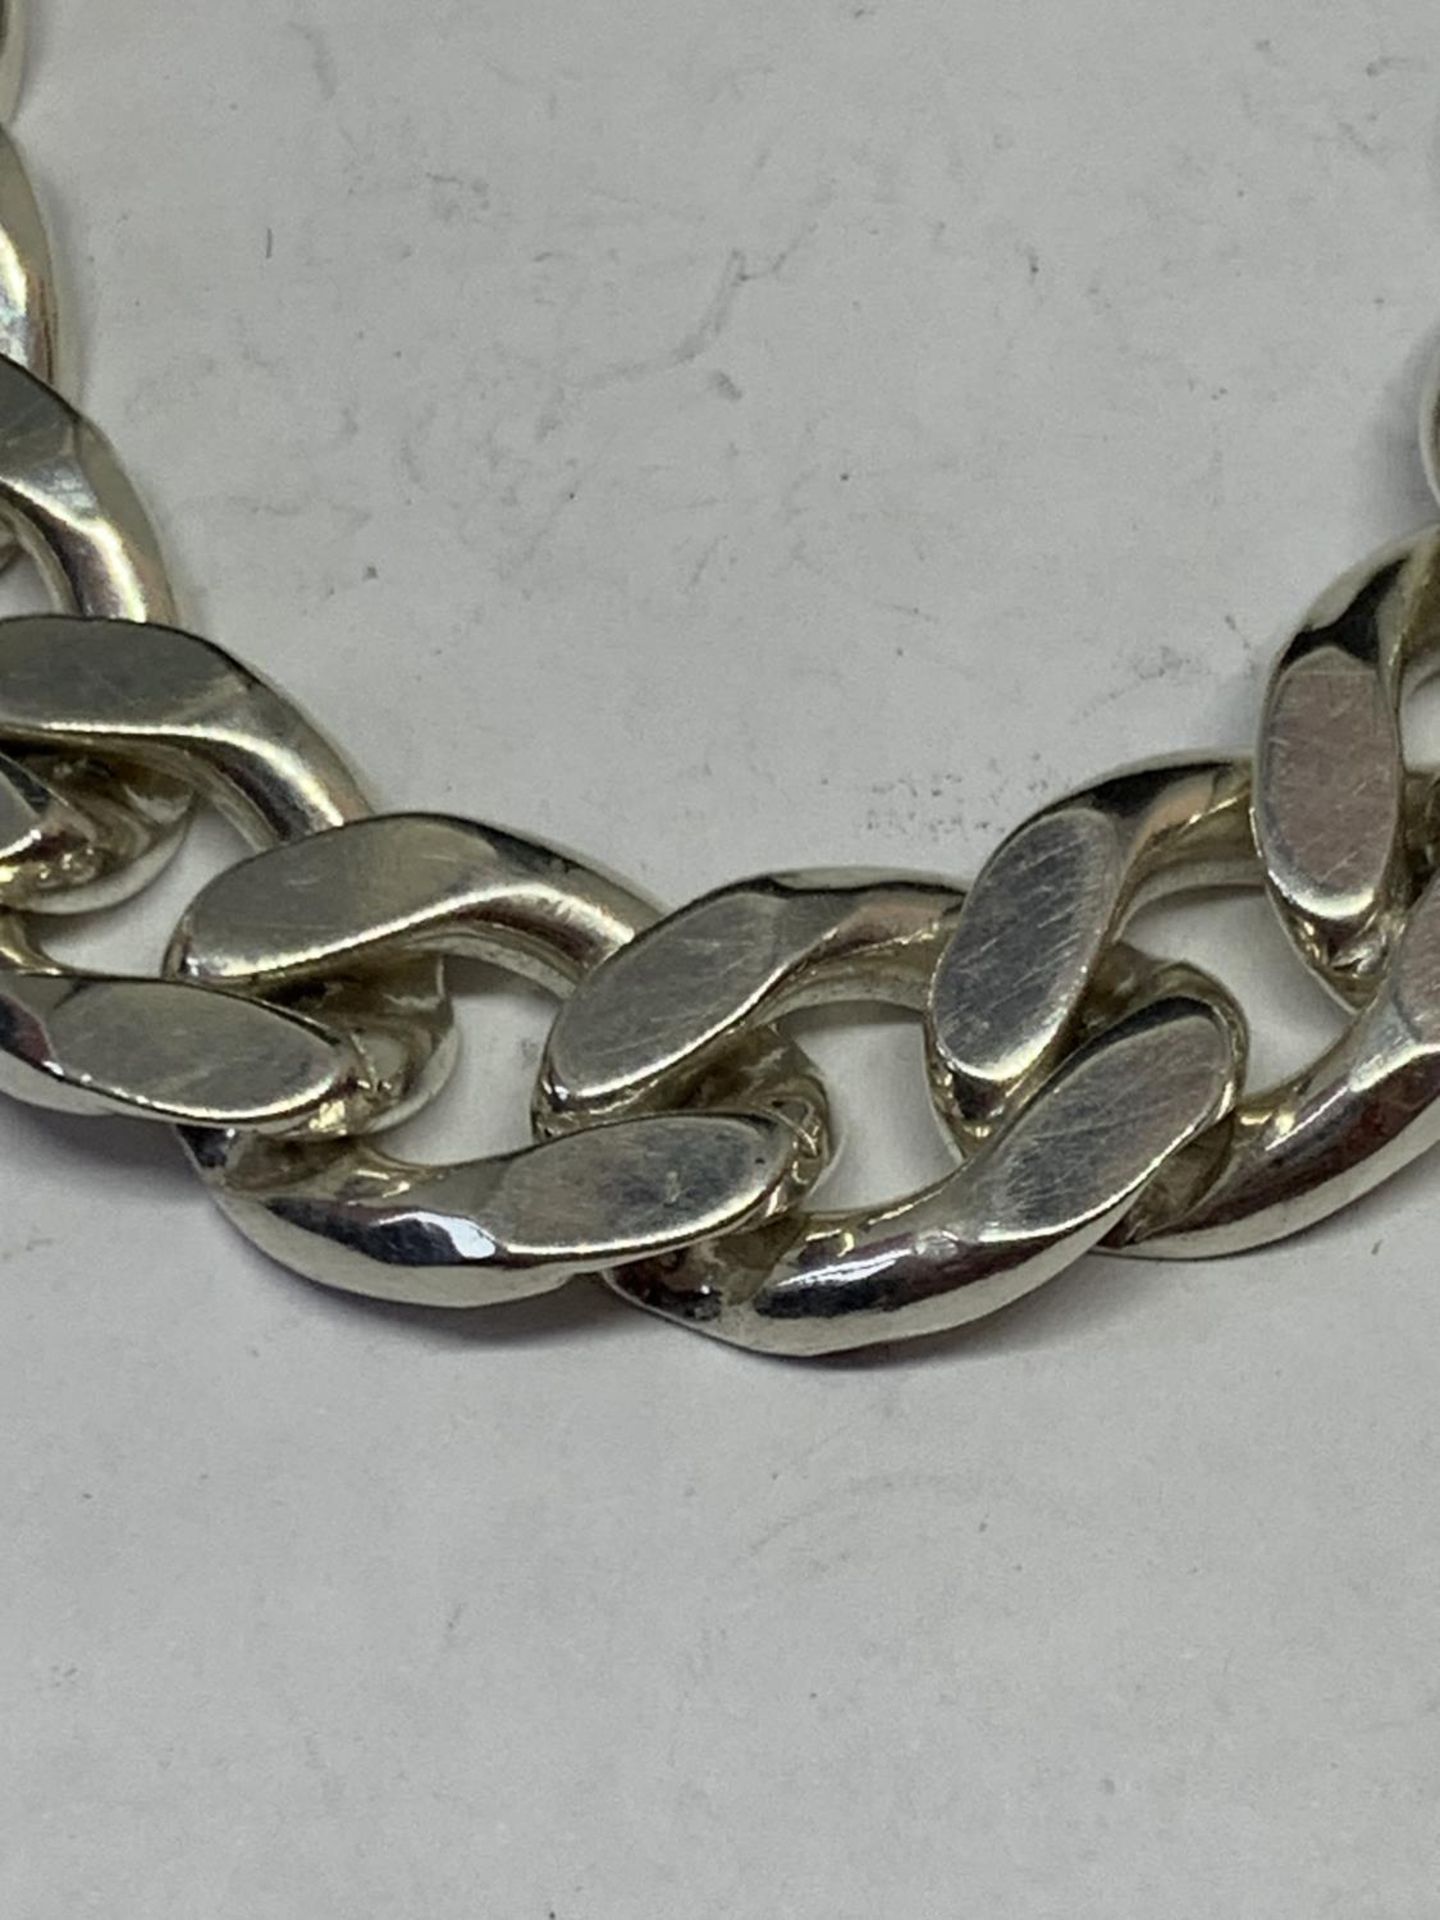 A SILVER WRIST CHAIN - Image 2 of 3